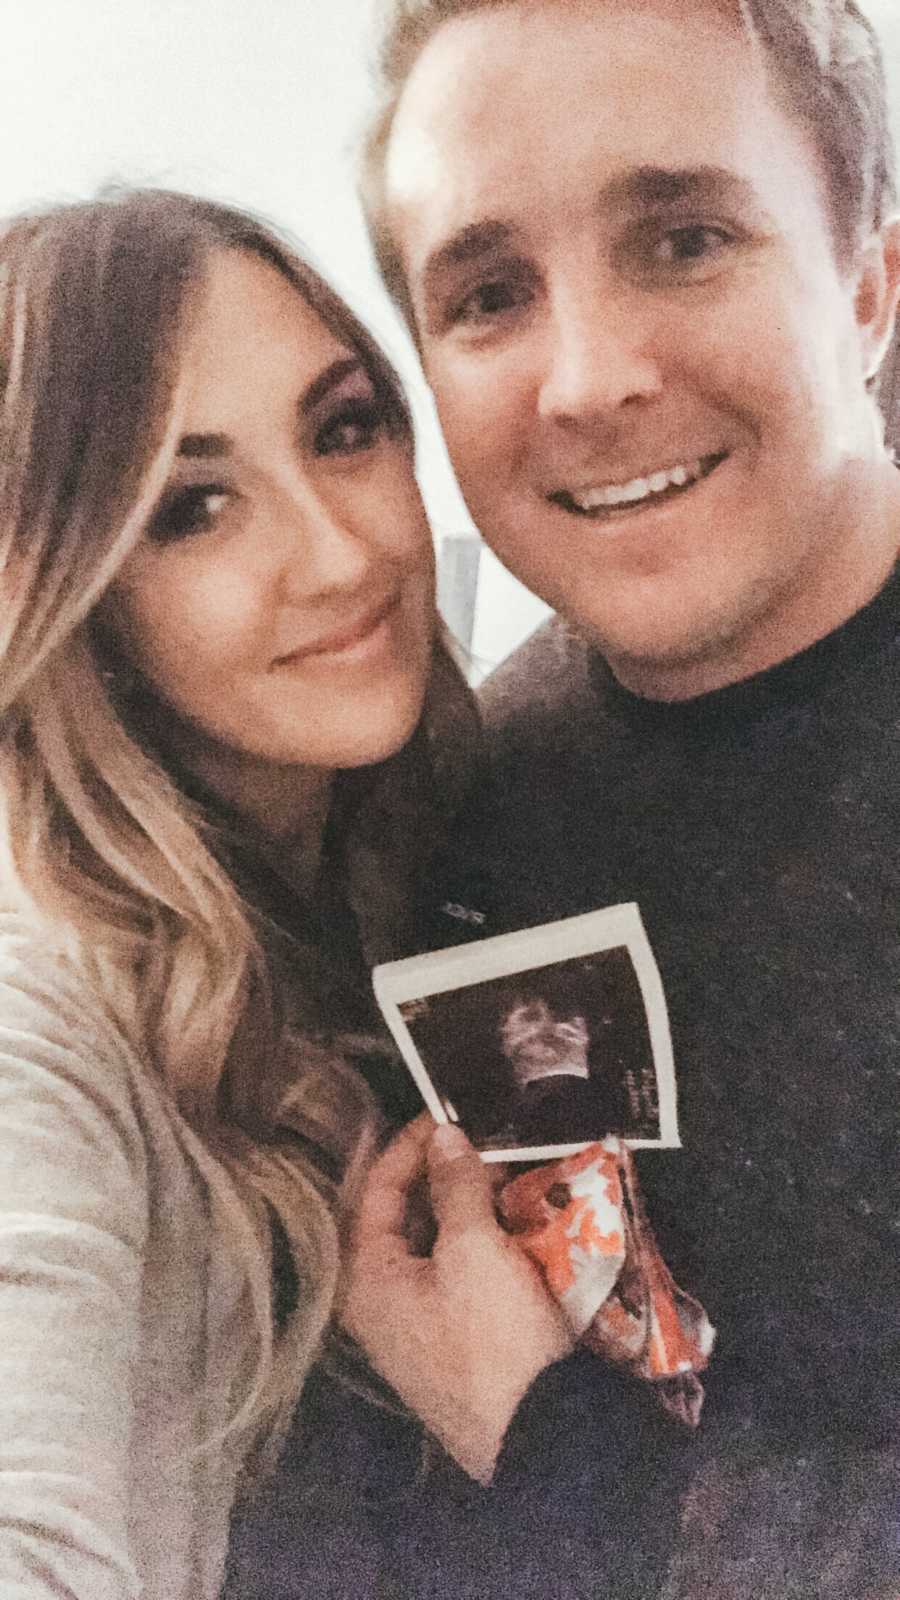 Husband smiles in selfie holding ultrasound picture beside wife who ended up miscarrying